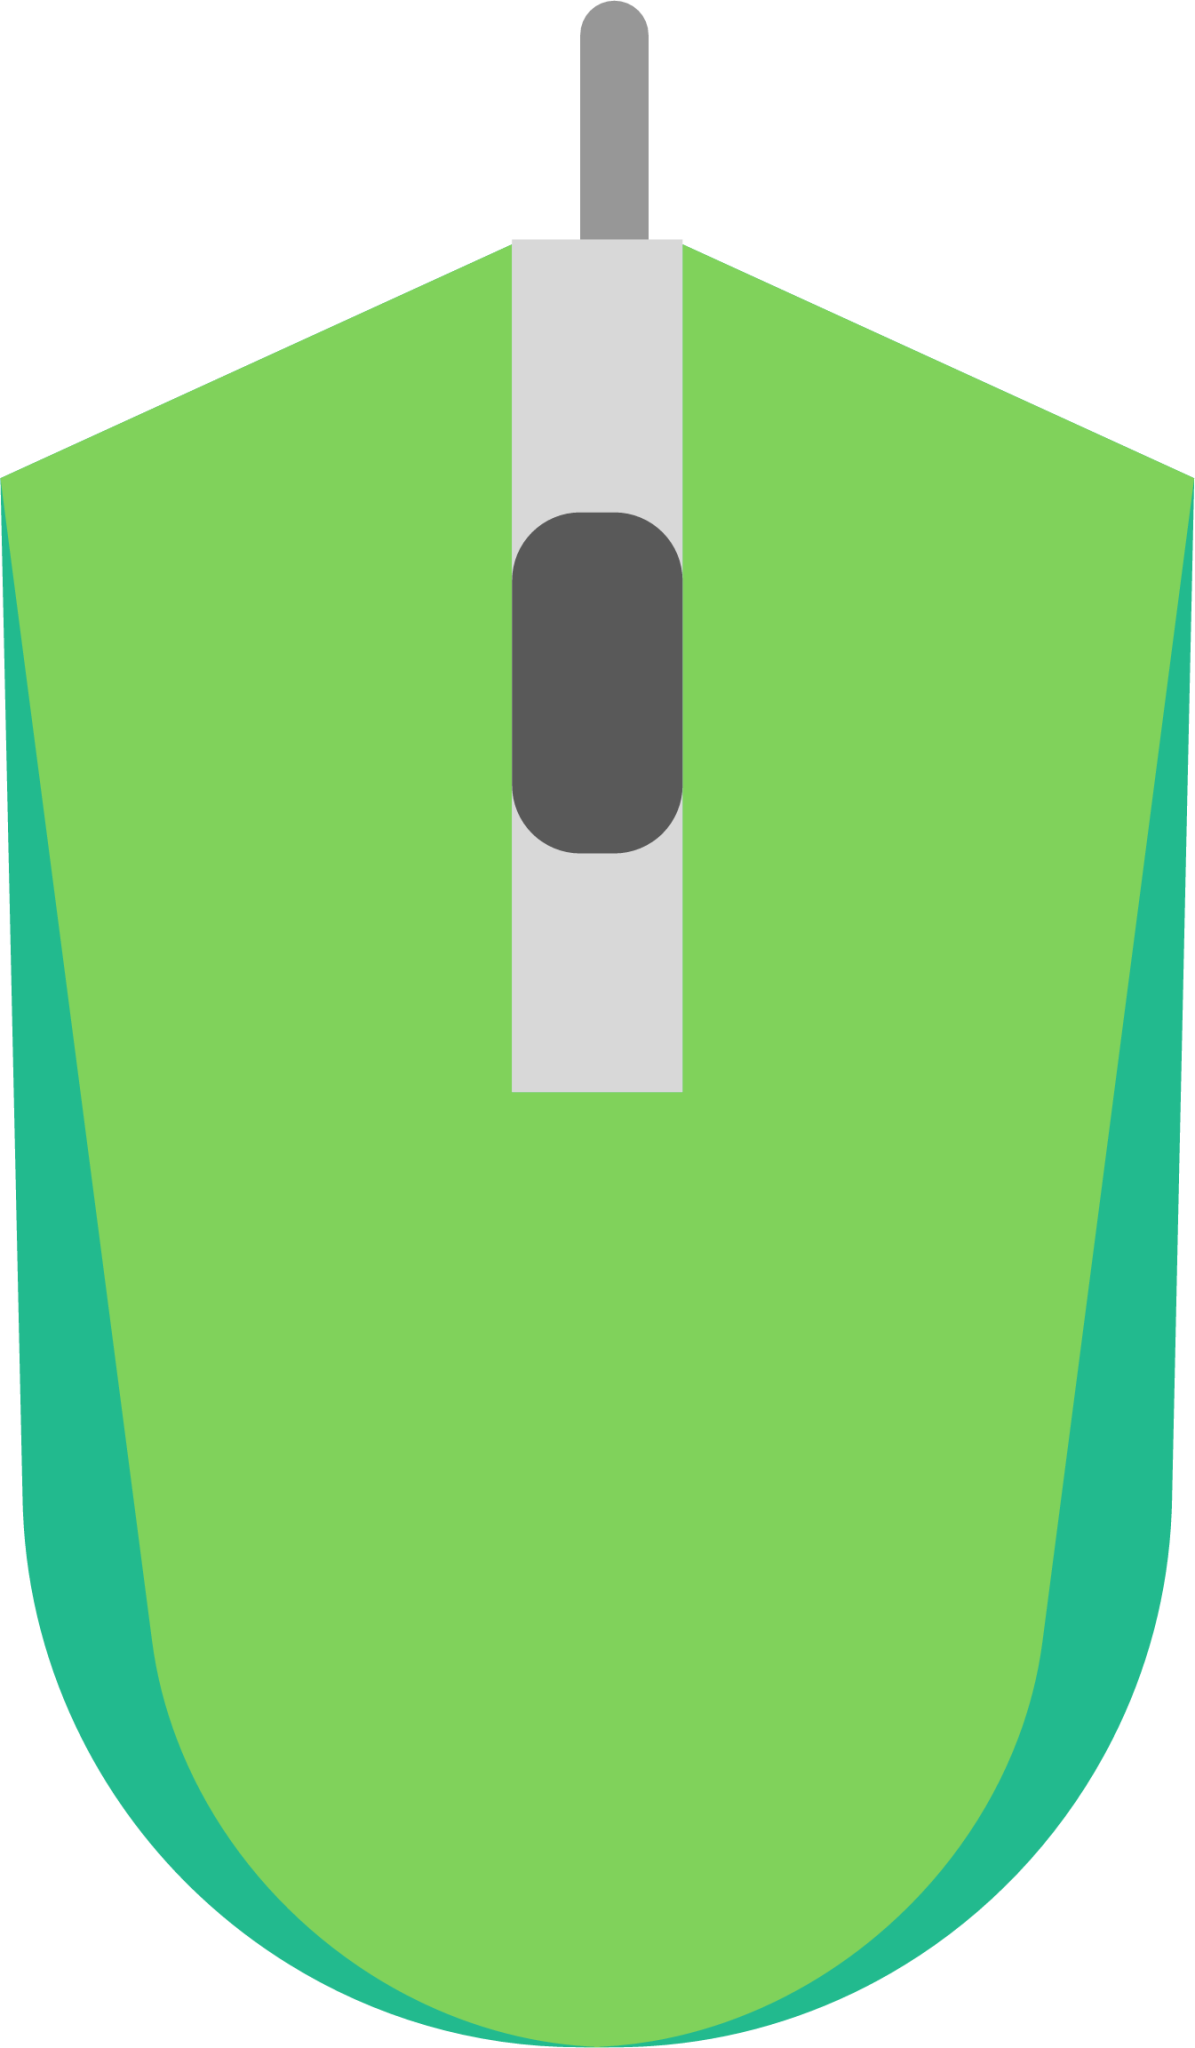 mouse 3 icon